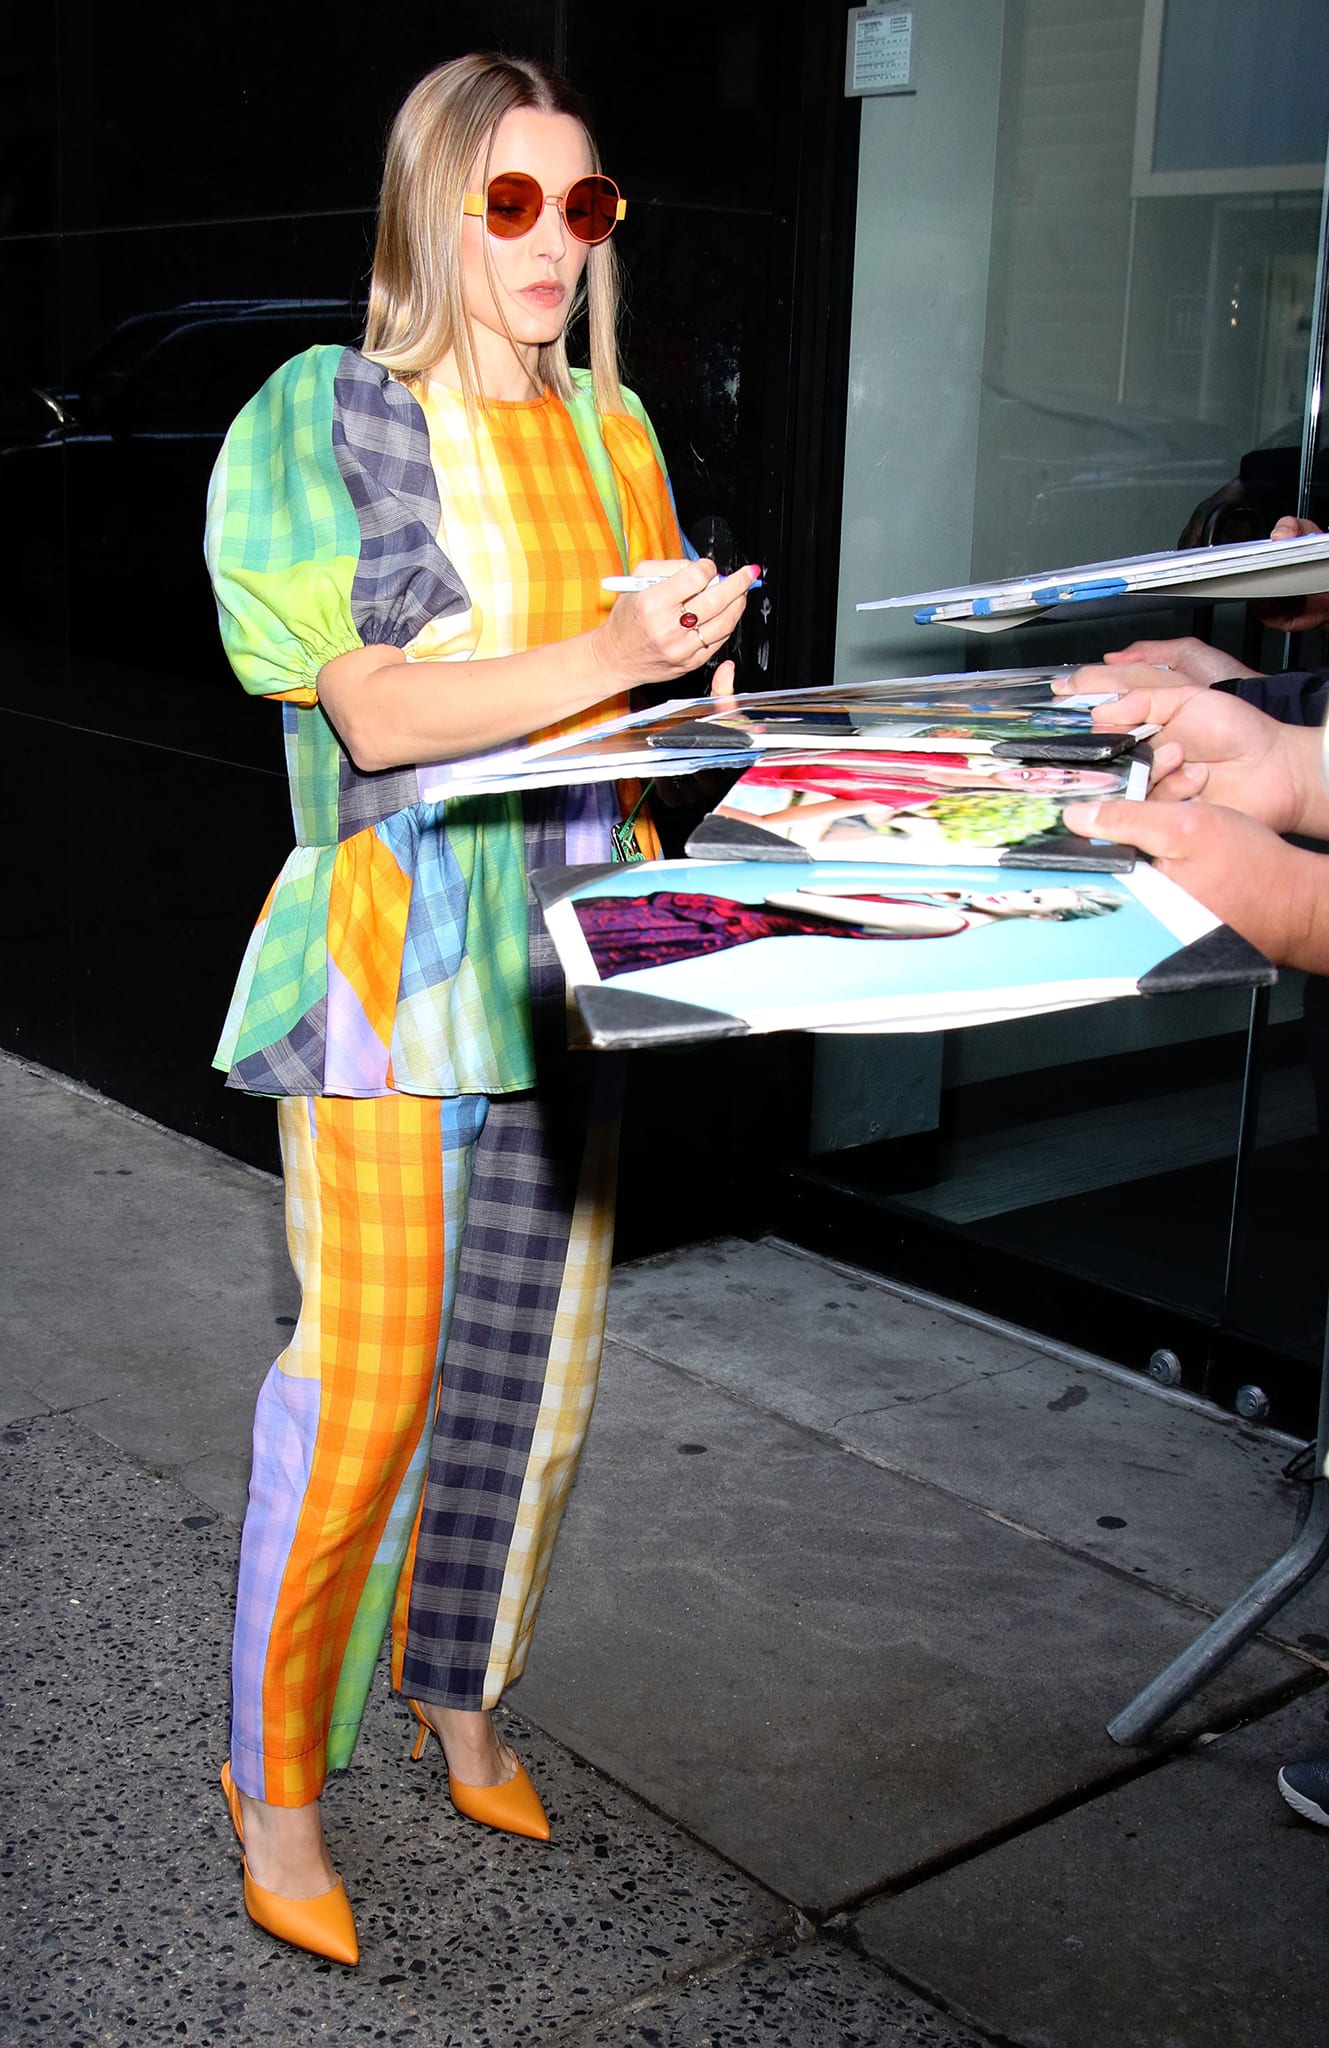 Kristen Bell signs autographs outside the Good Morning America Studios